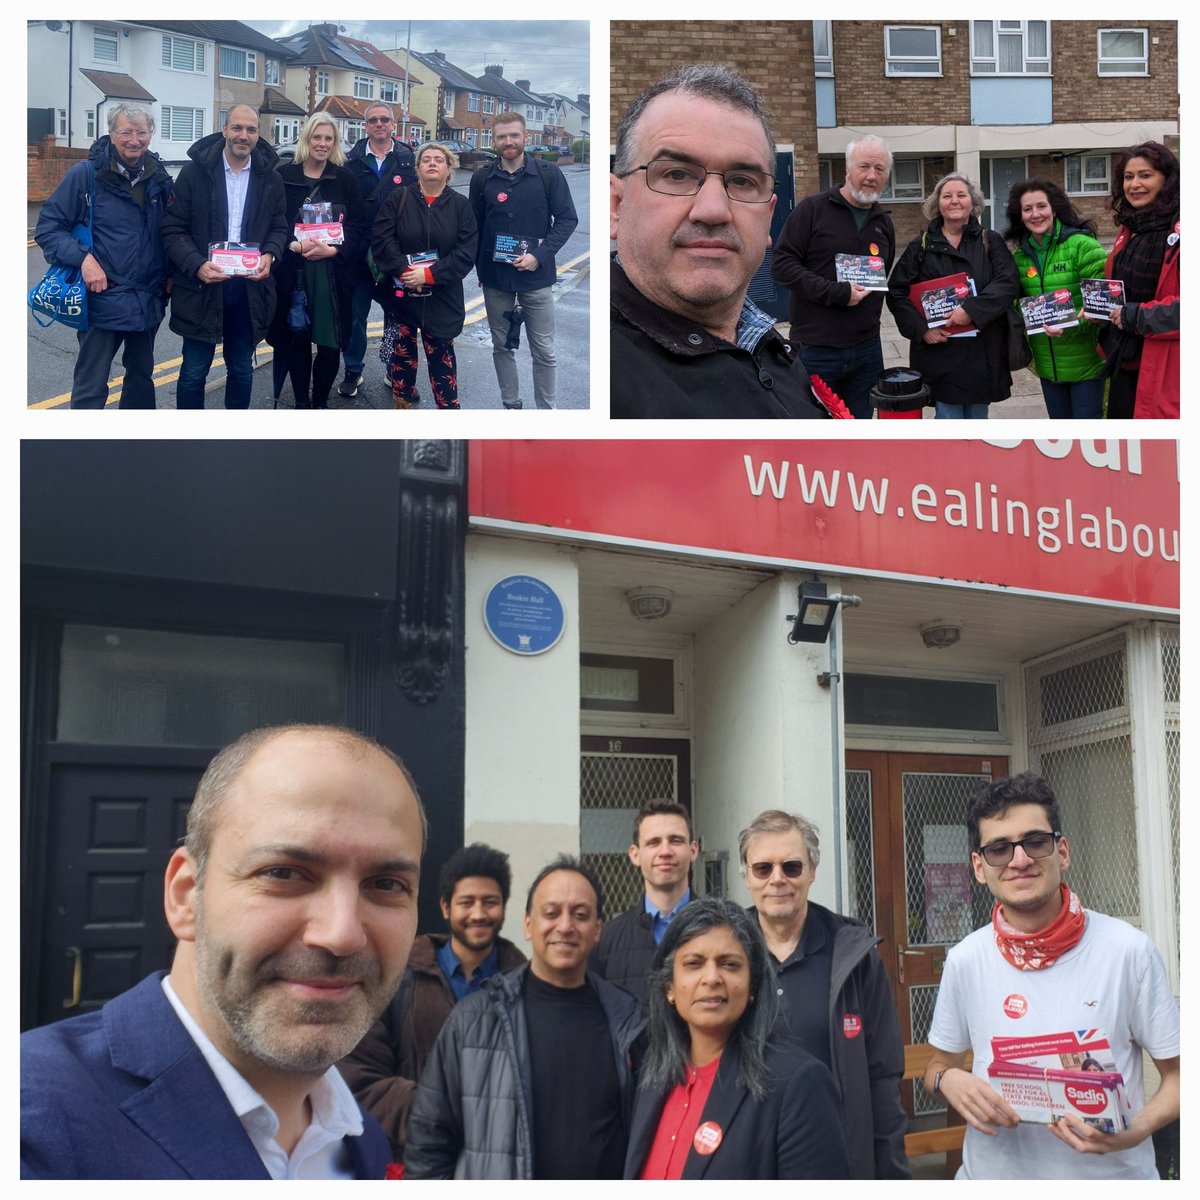 From #Acton to #Ruislip & #Northolt , the #LabourDoorstep teams were having some great conversations. So many feeling let down by the Tories. Whereas @SadiqKhan & #Labour🌹 offer solutions to 🏘️ Tackle the housing crisis 💷 Create well paid jobs 👮🏽‍♀️ Invest in our public services